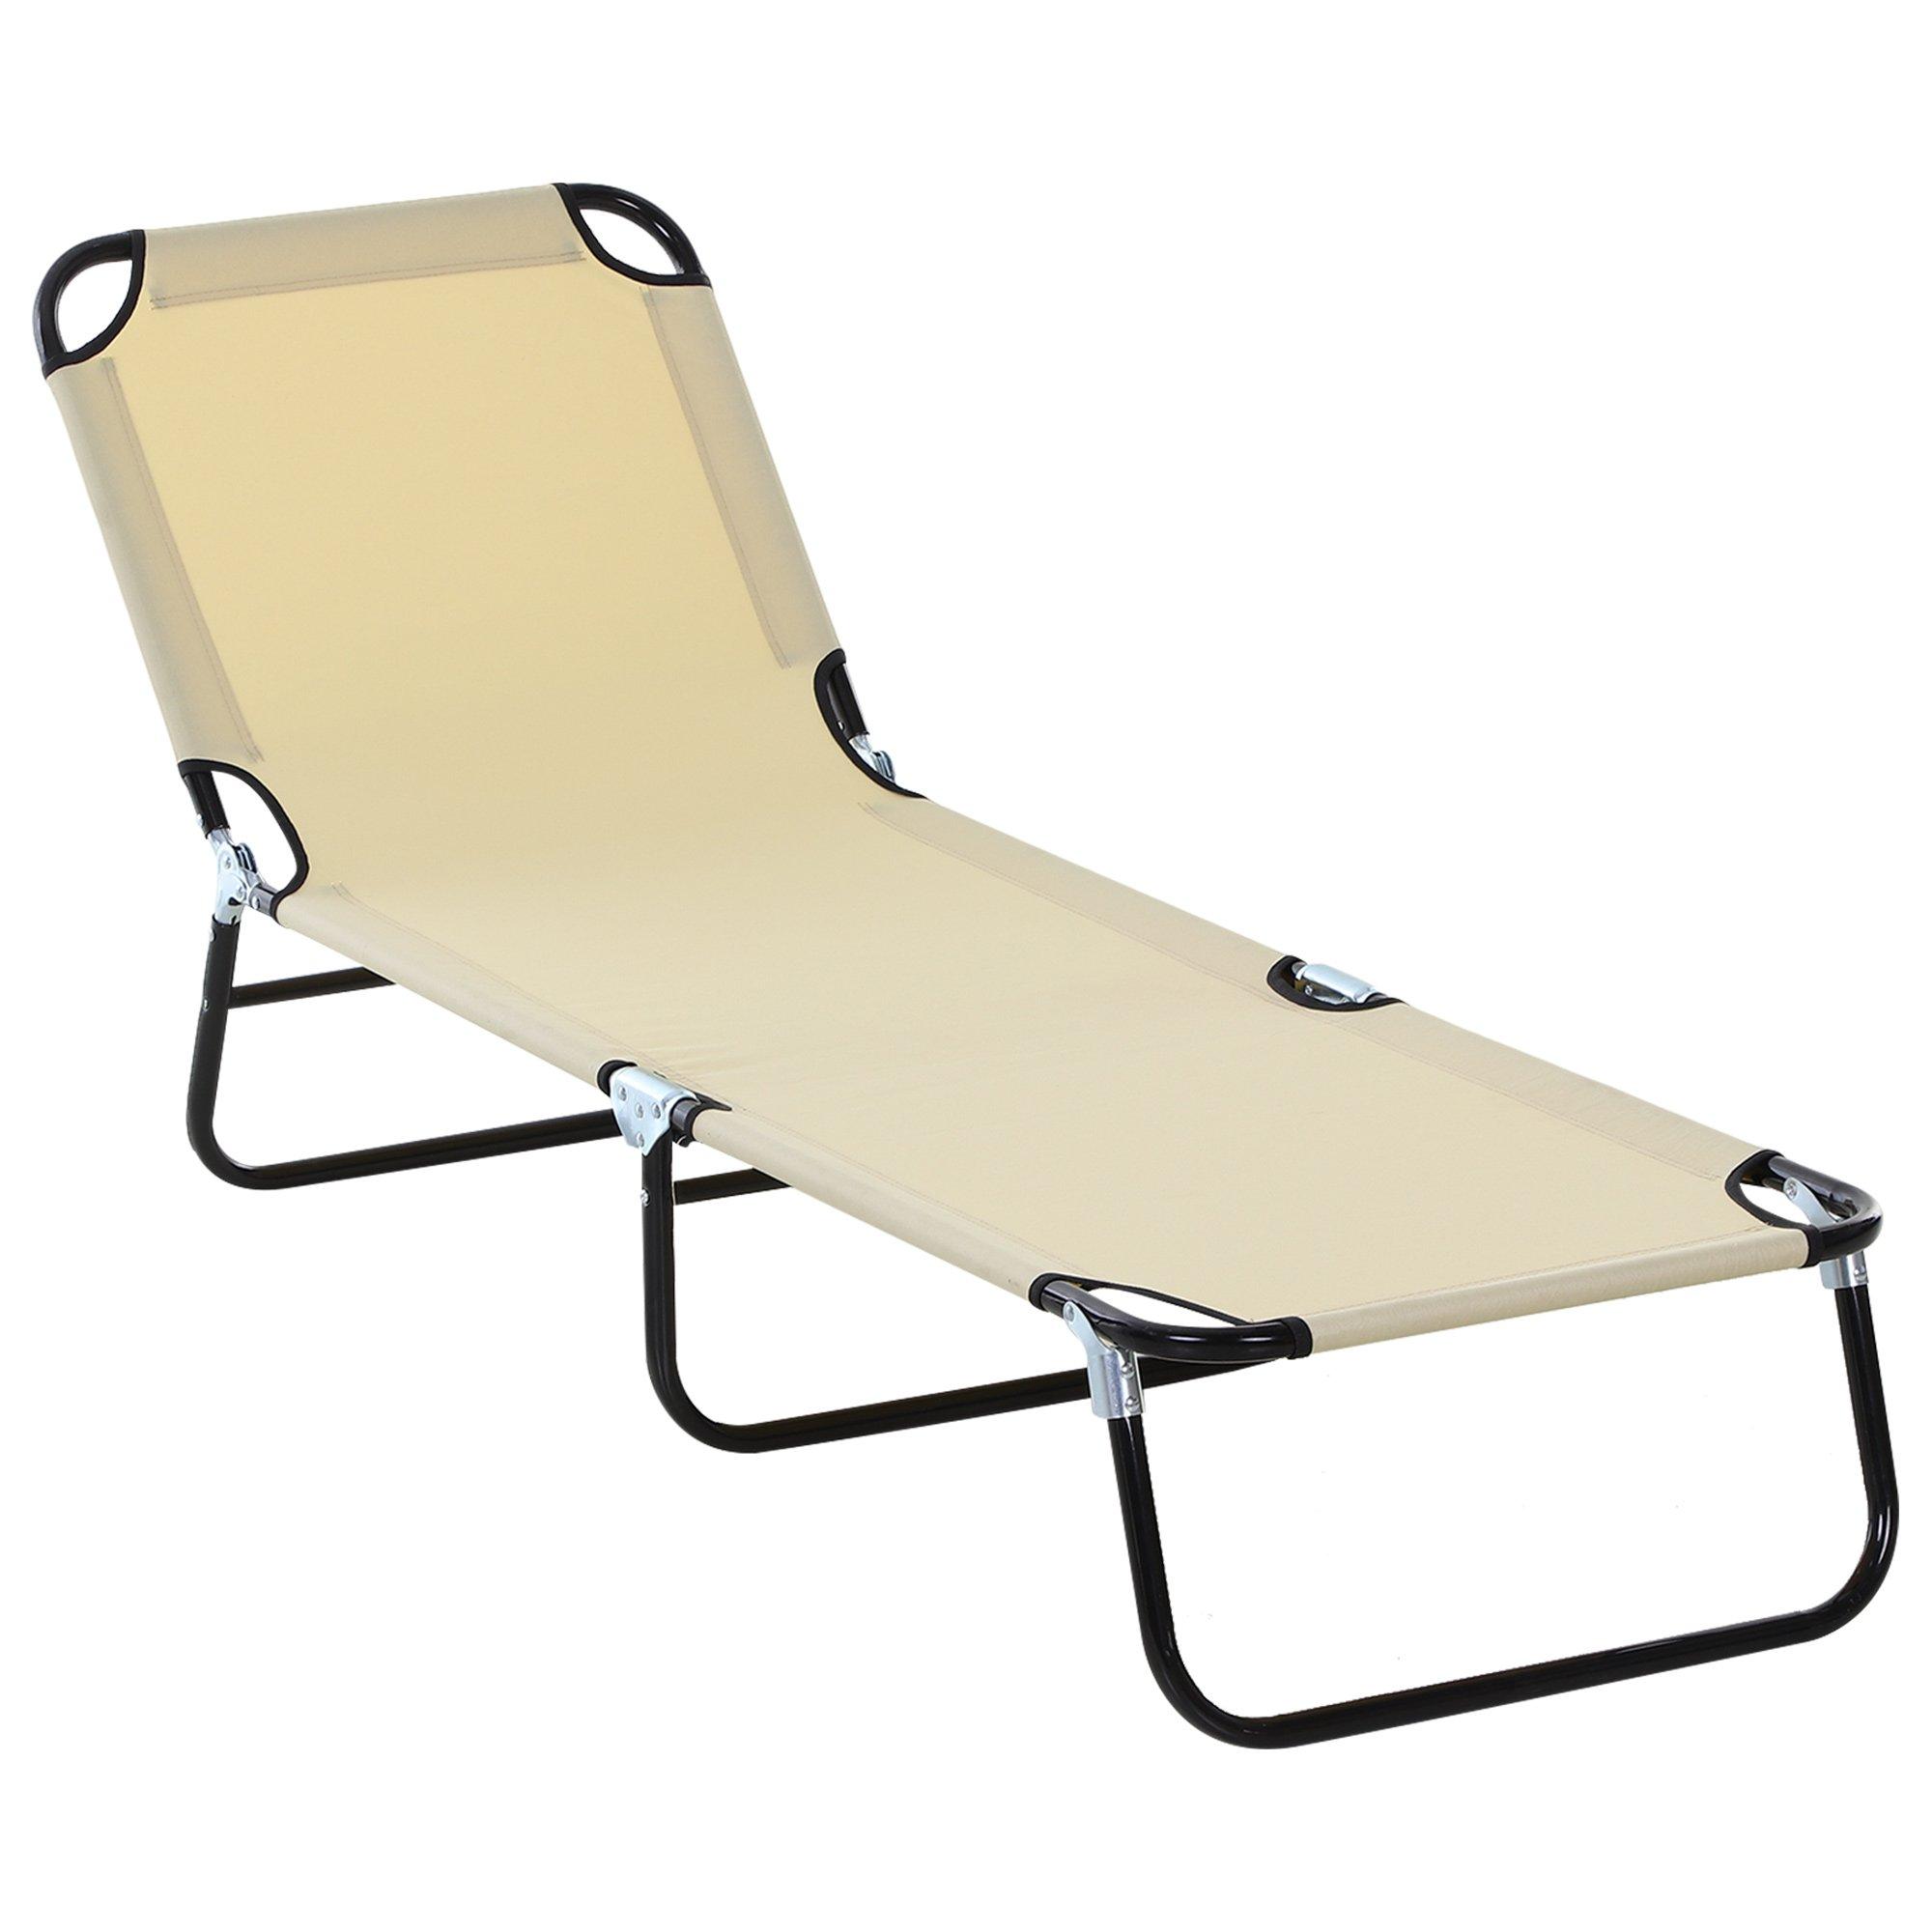 Folding Lounge Chair Outdoor Chaise Lounge for Bench Patio